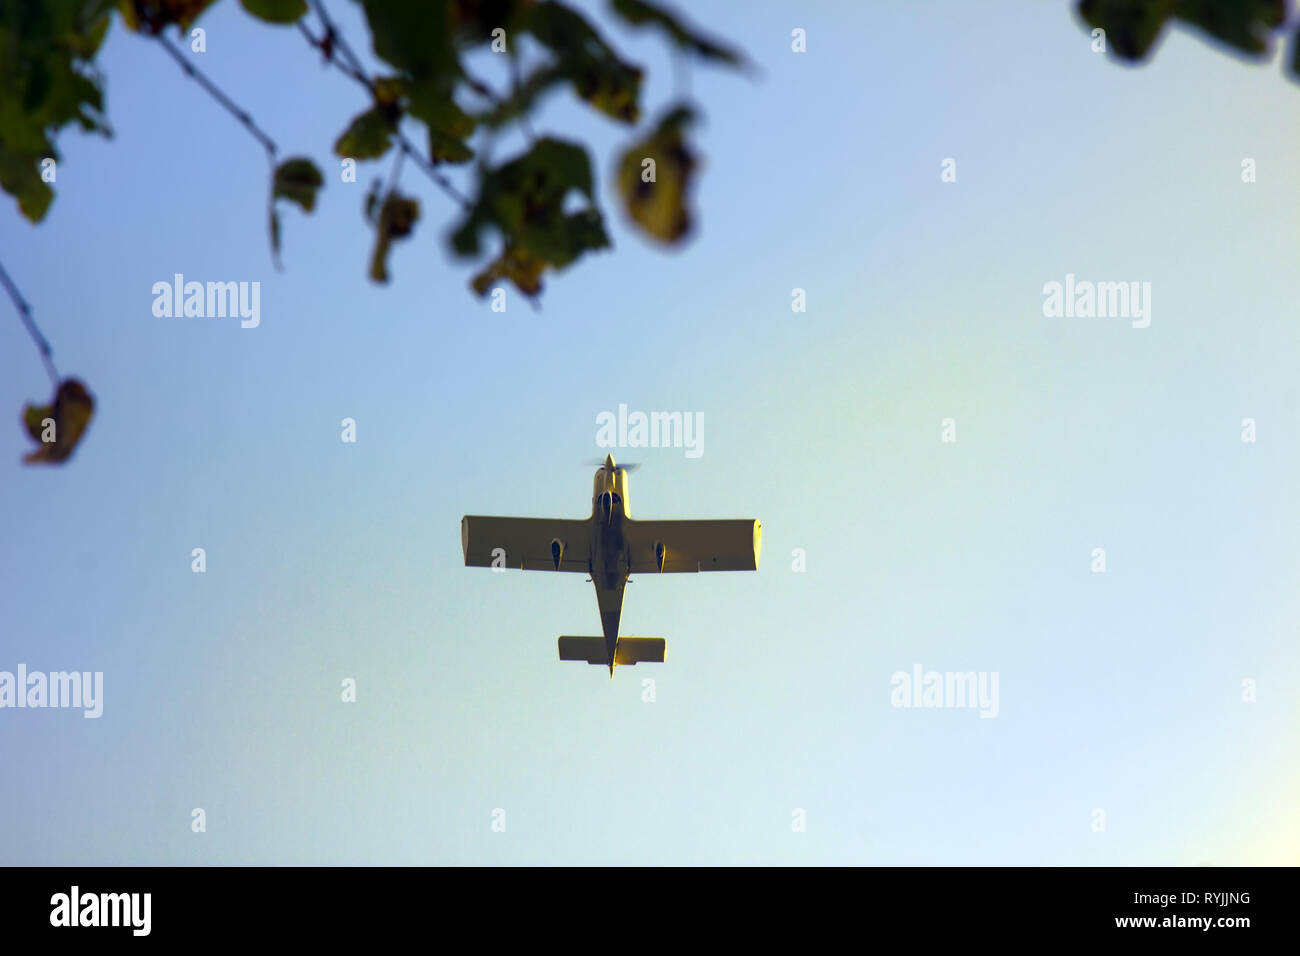 Kind Of Sports Aircraft Single Screw With Massive Wings And Changing Geometry Of Wing In Air Silhouette Of Plane View From Below Stock Photo Alamy